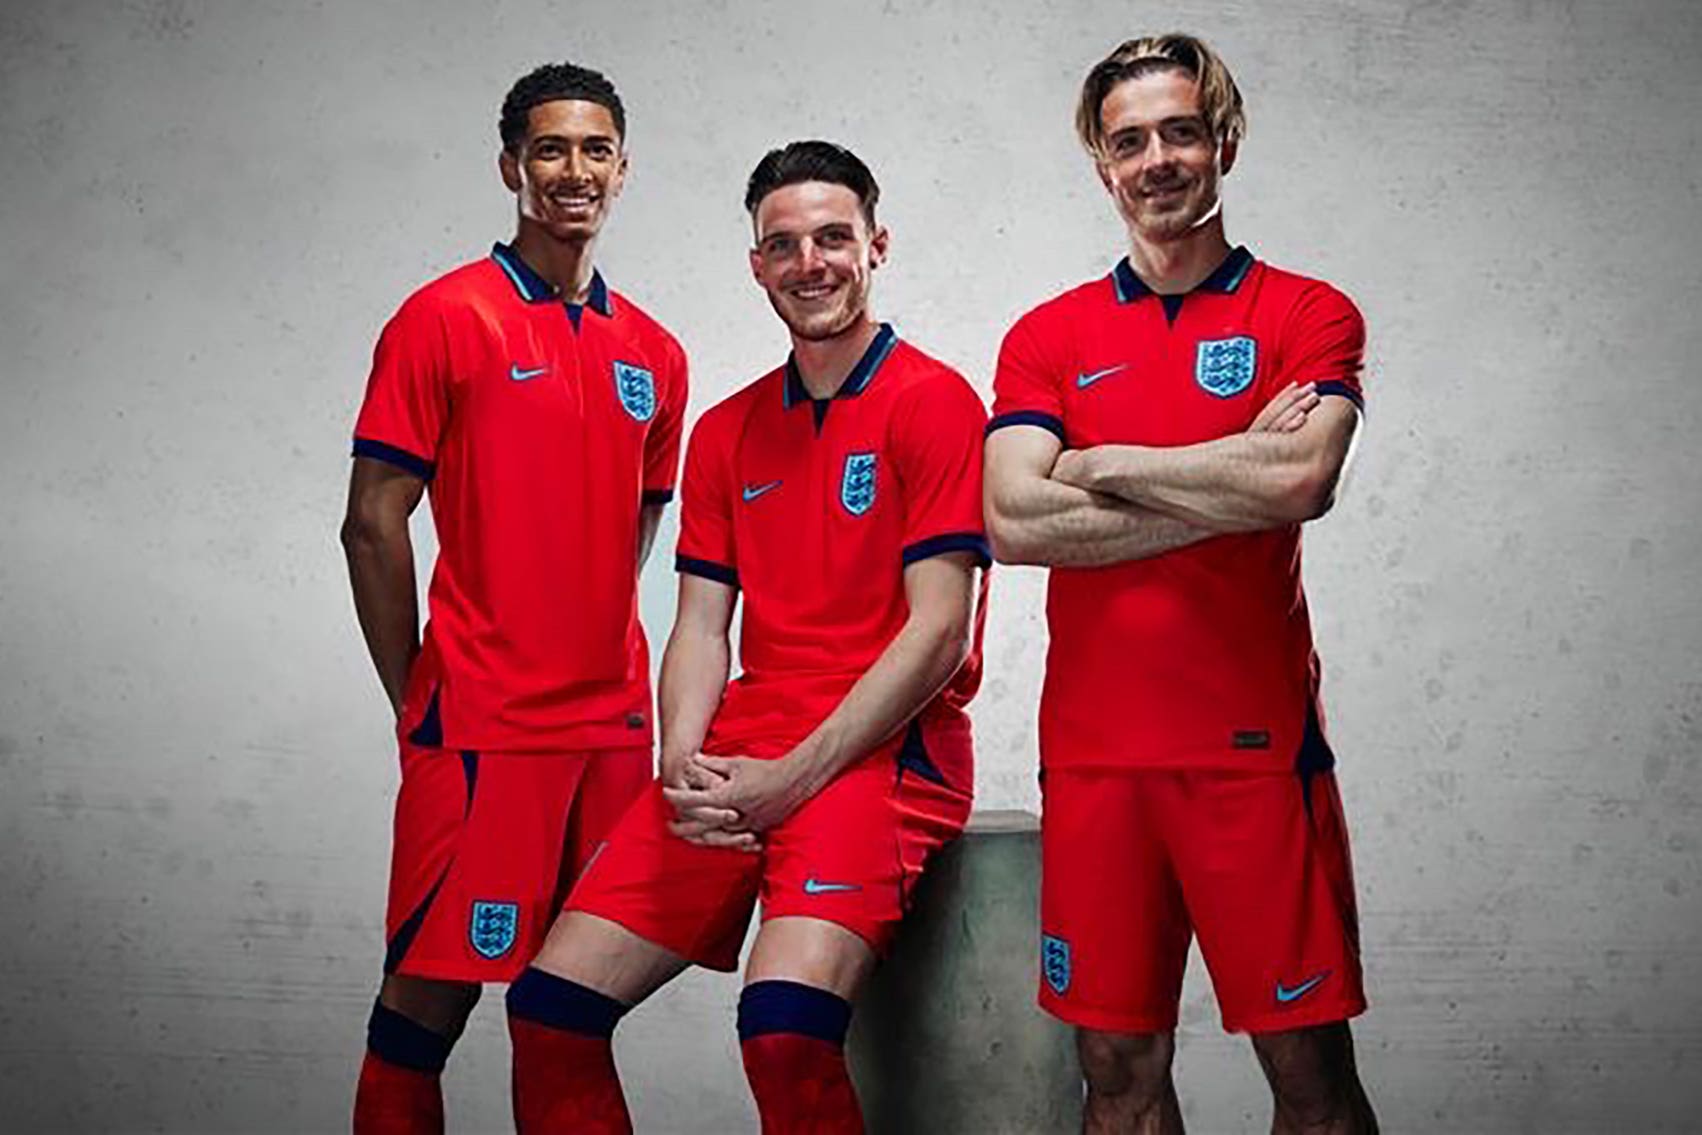 Jude Bellingham, Declan Rice and Jack Grealish, pictured last September wearing the new England away kit (FA handout/PA)